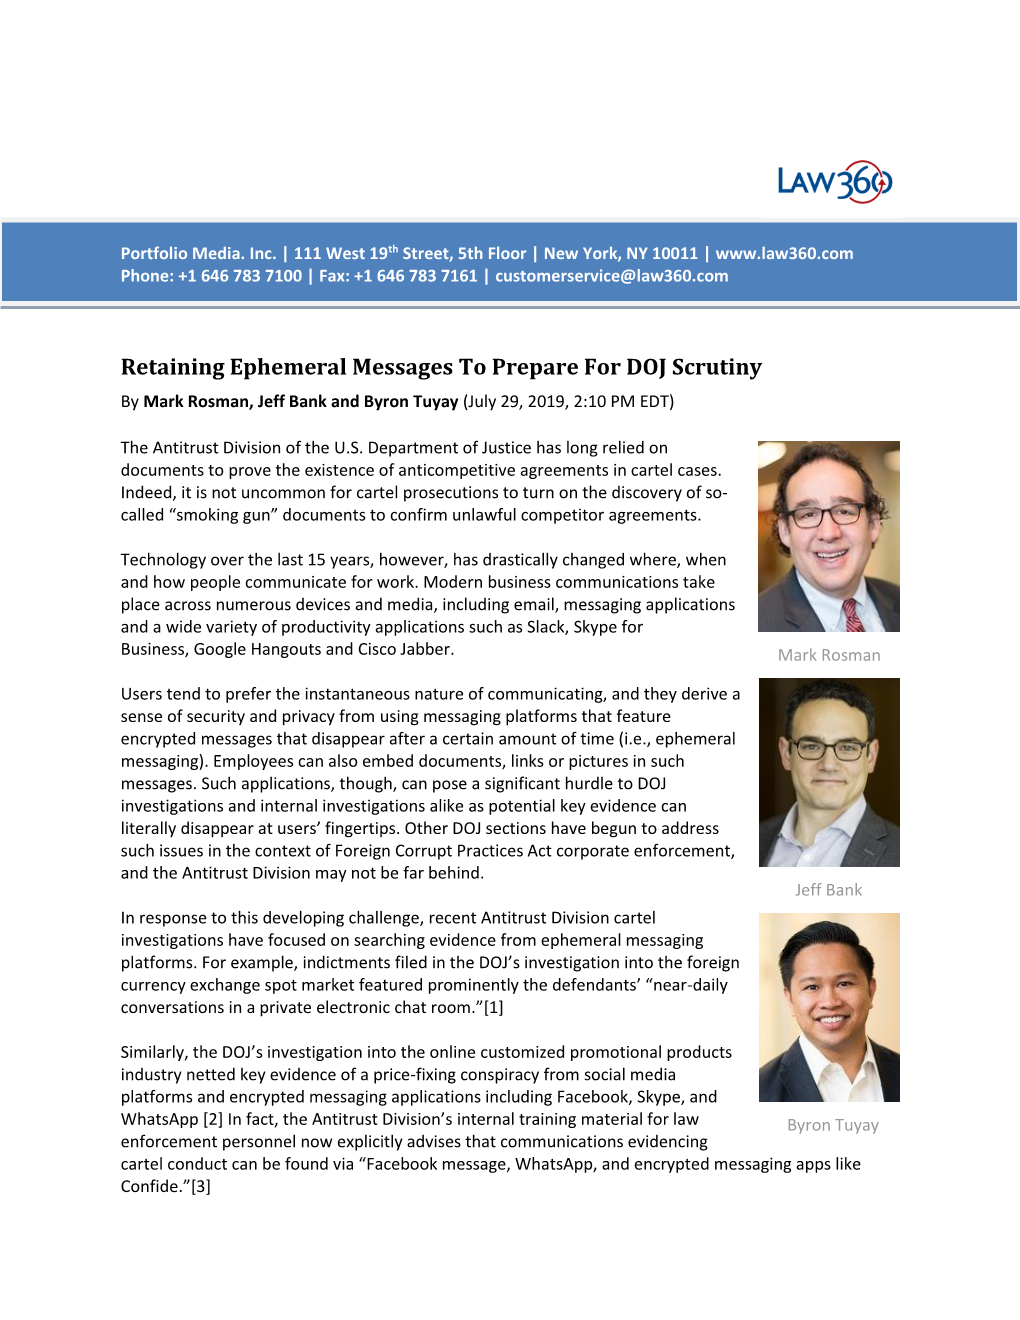 Retaining Ephemeral Messages to Prepare for DOJ Scrutiny by Mark Rosman, Jeff Bank and Byron Tuyay (July 29, 2019, 2:10 PM EDT)